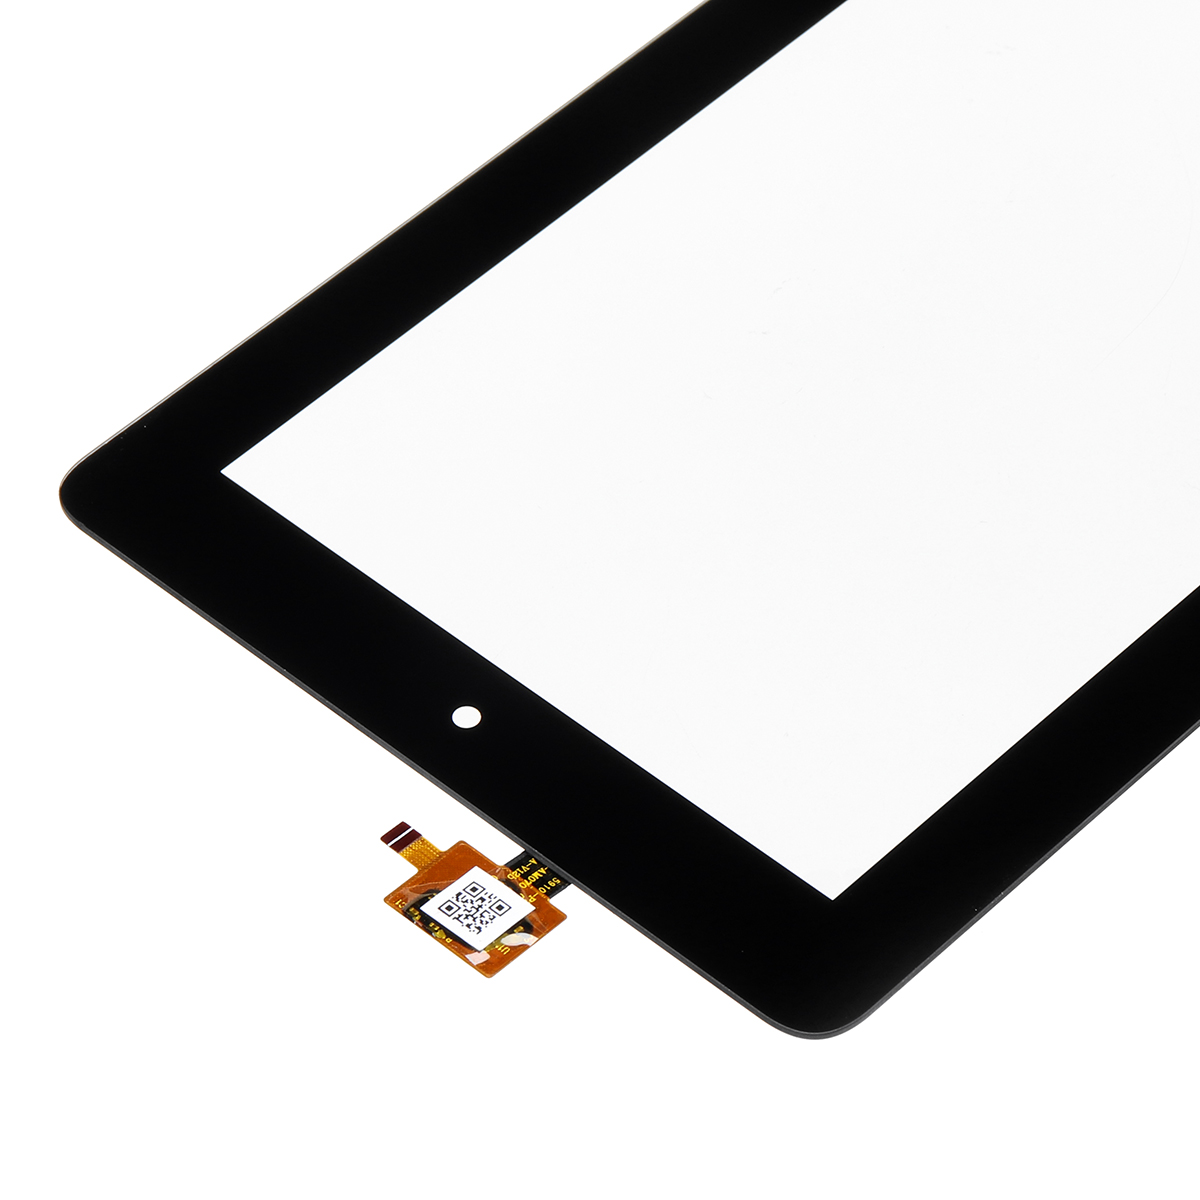 7-Inch-LCD-Touch-Screen-Digitizer--Polarizer-For-Amazon-Kindle-Fire-HD-5th-Gen-SV98LN-Replacement-Re-1323173